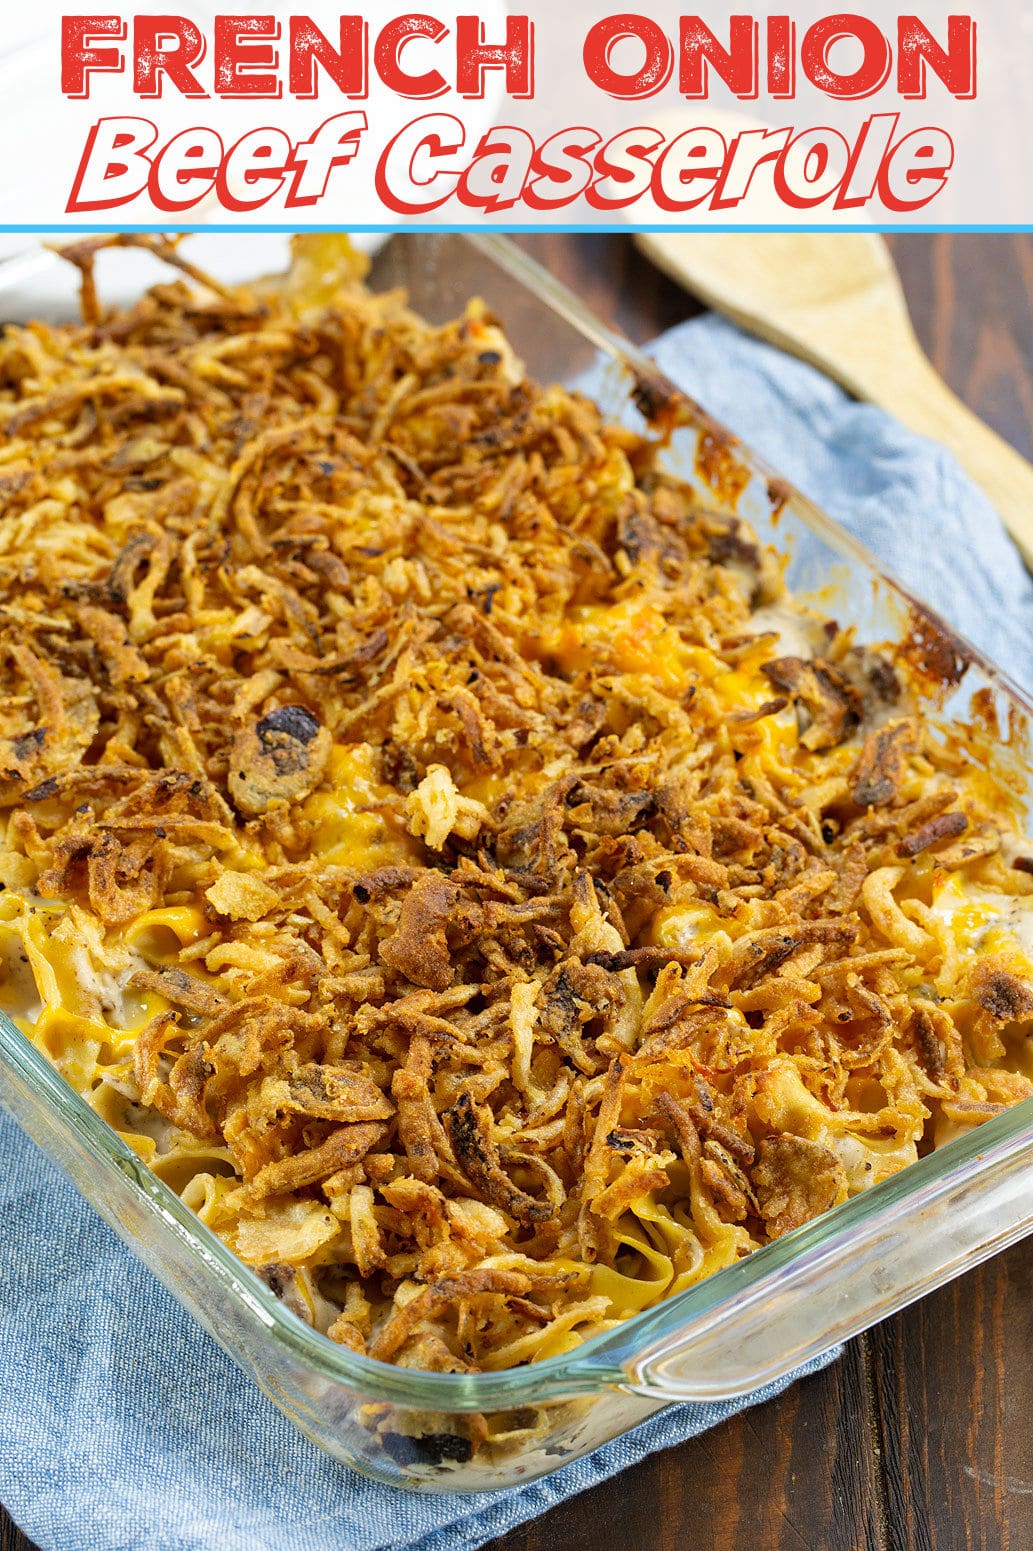 French Onion Ground Beef Casserole in a baking dish.